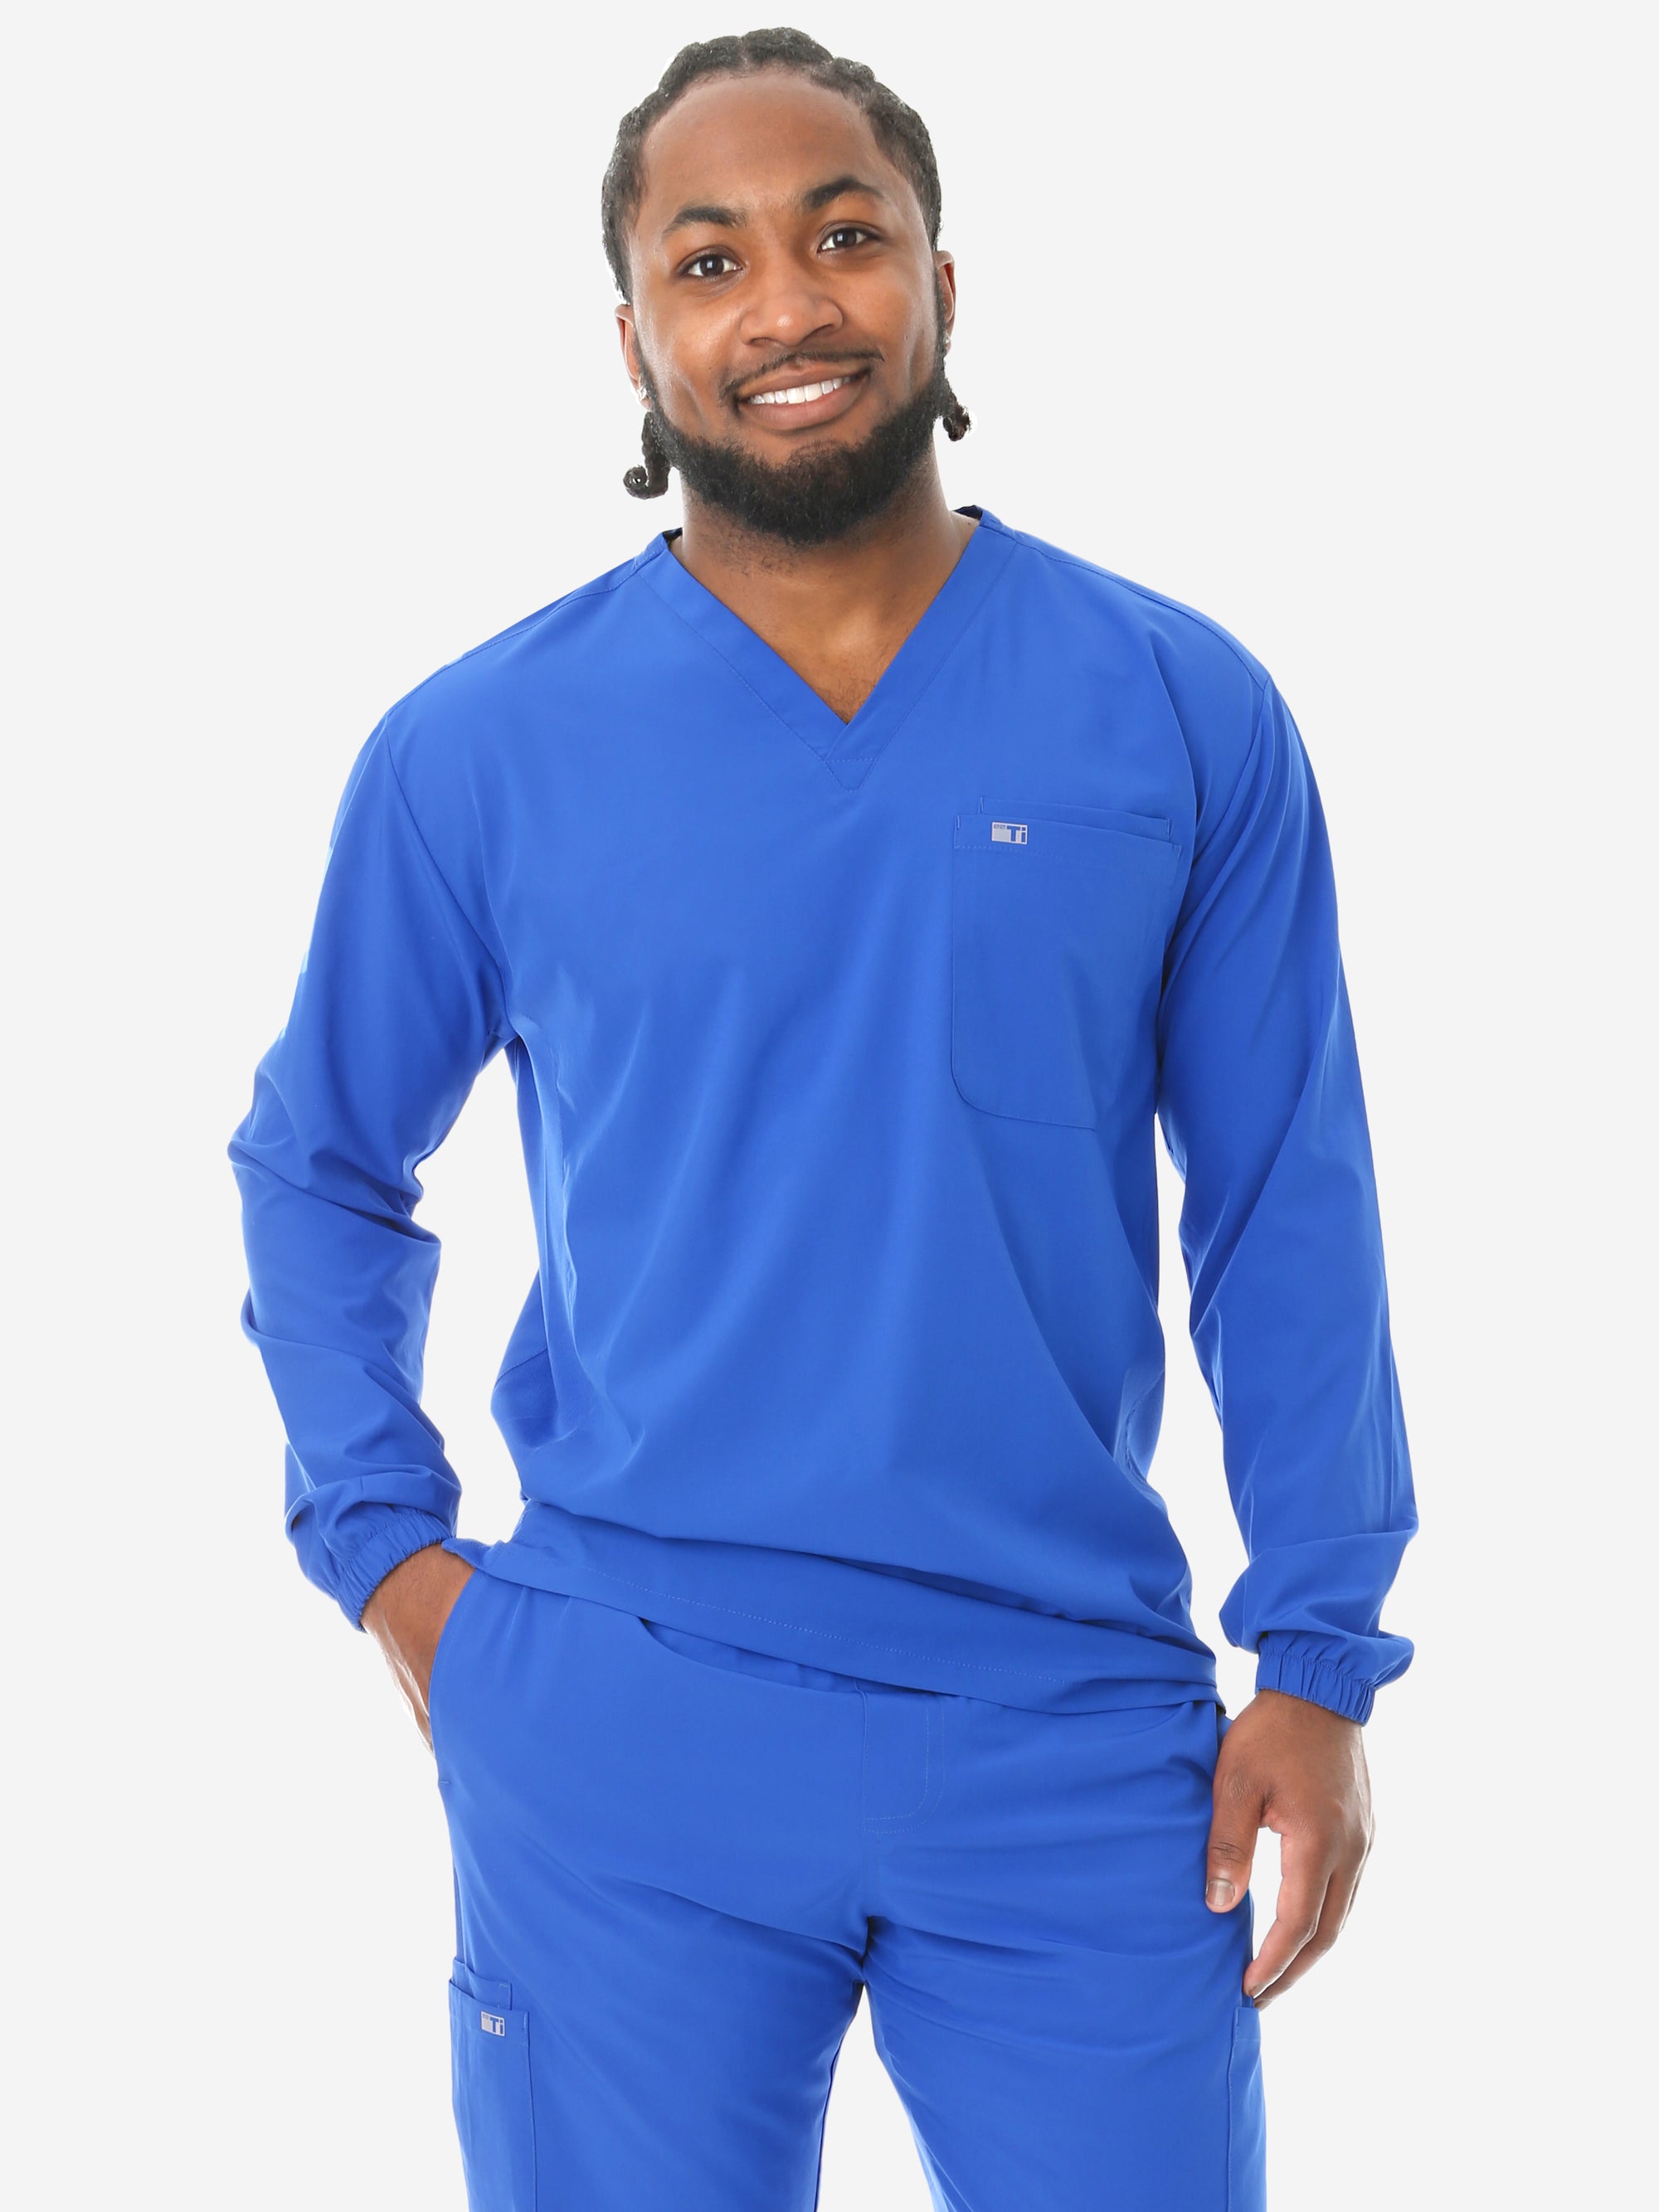 Men&#39;s Royal Blue Long-Sleeve Scrub Top Front View Top Only